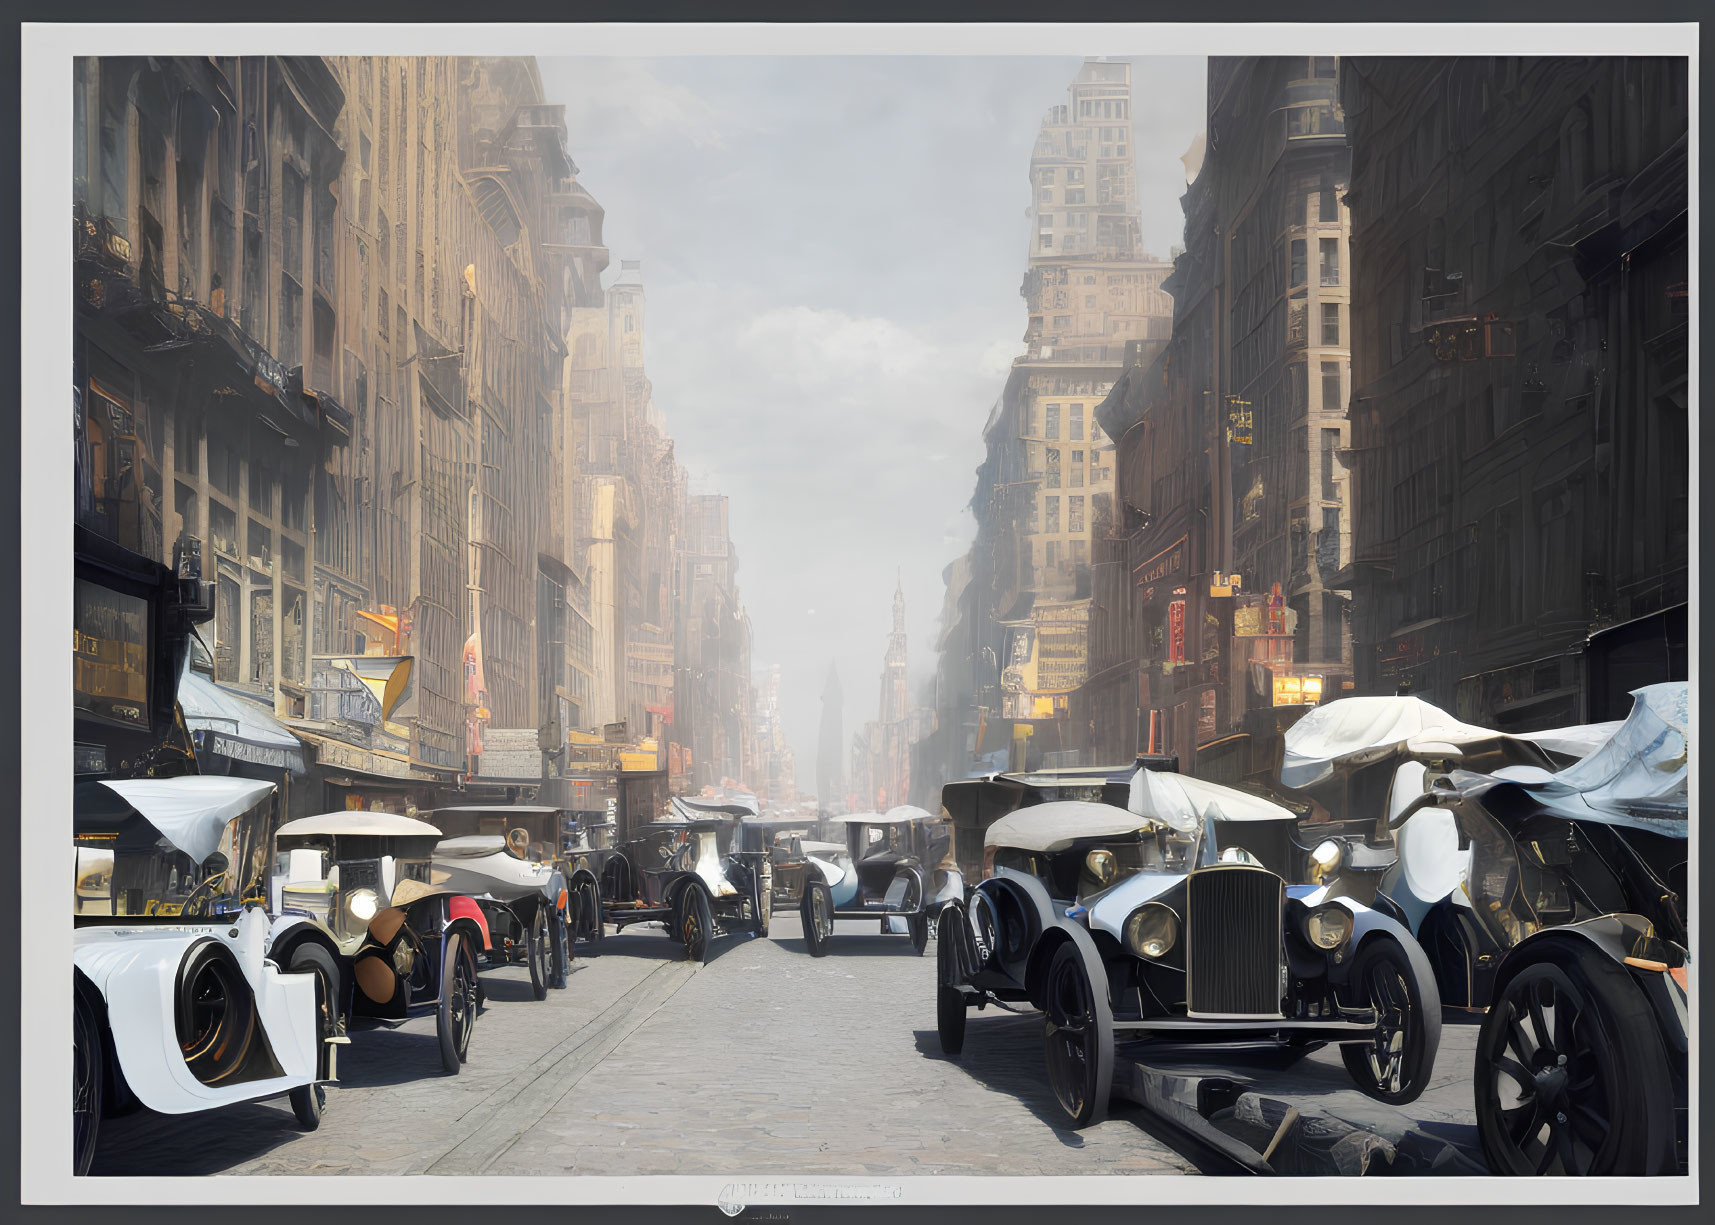 Vintage cars and tall buildings on early 20th-century city street